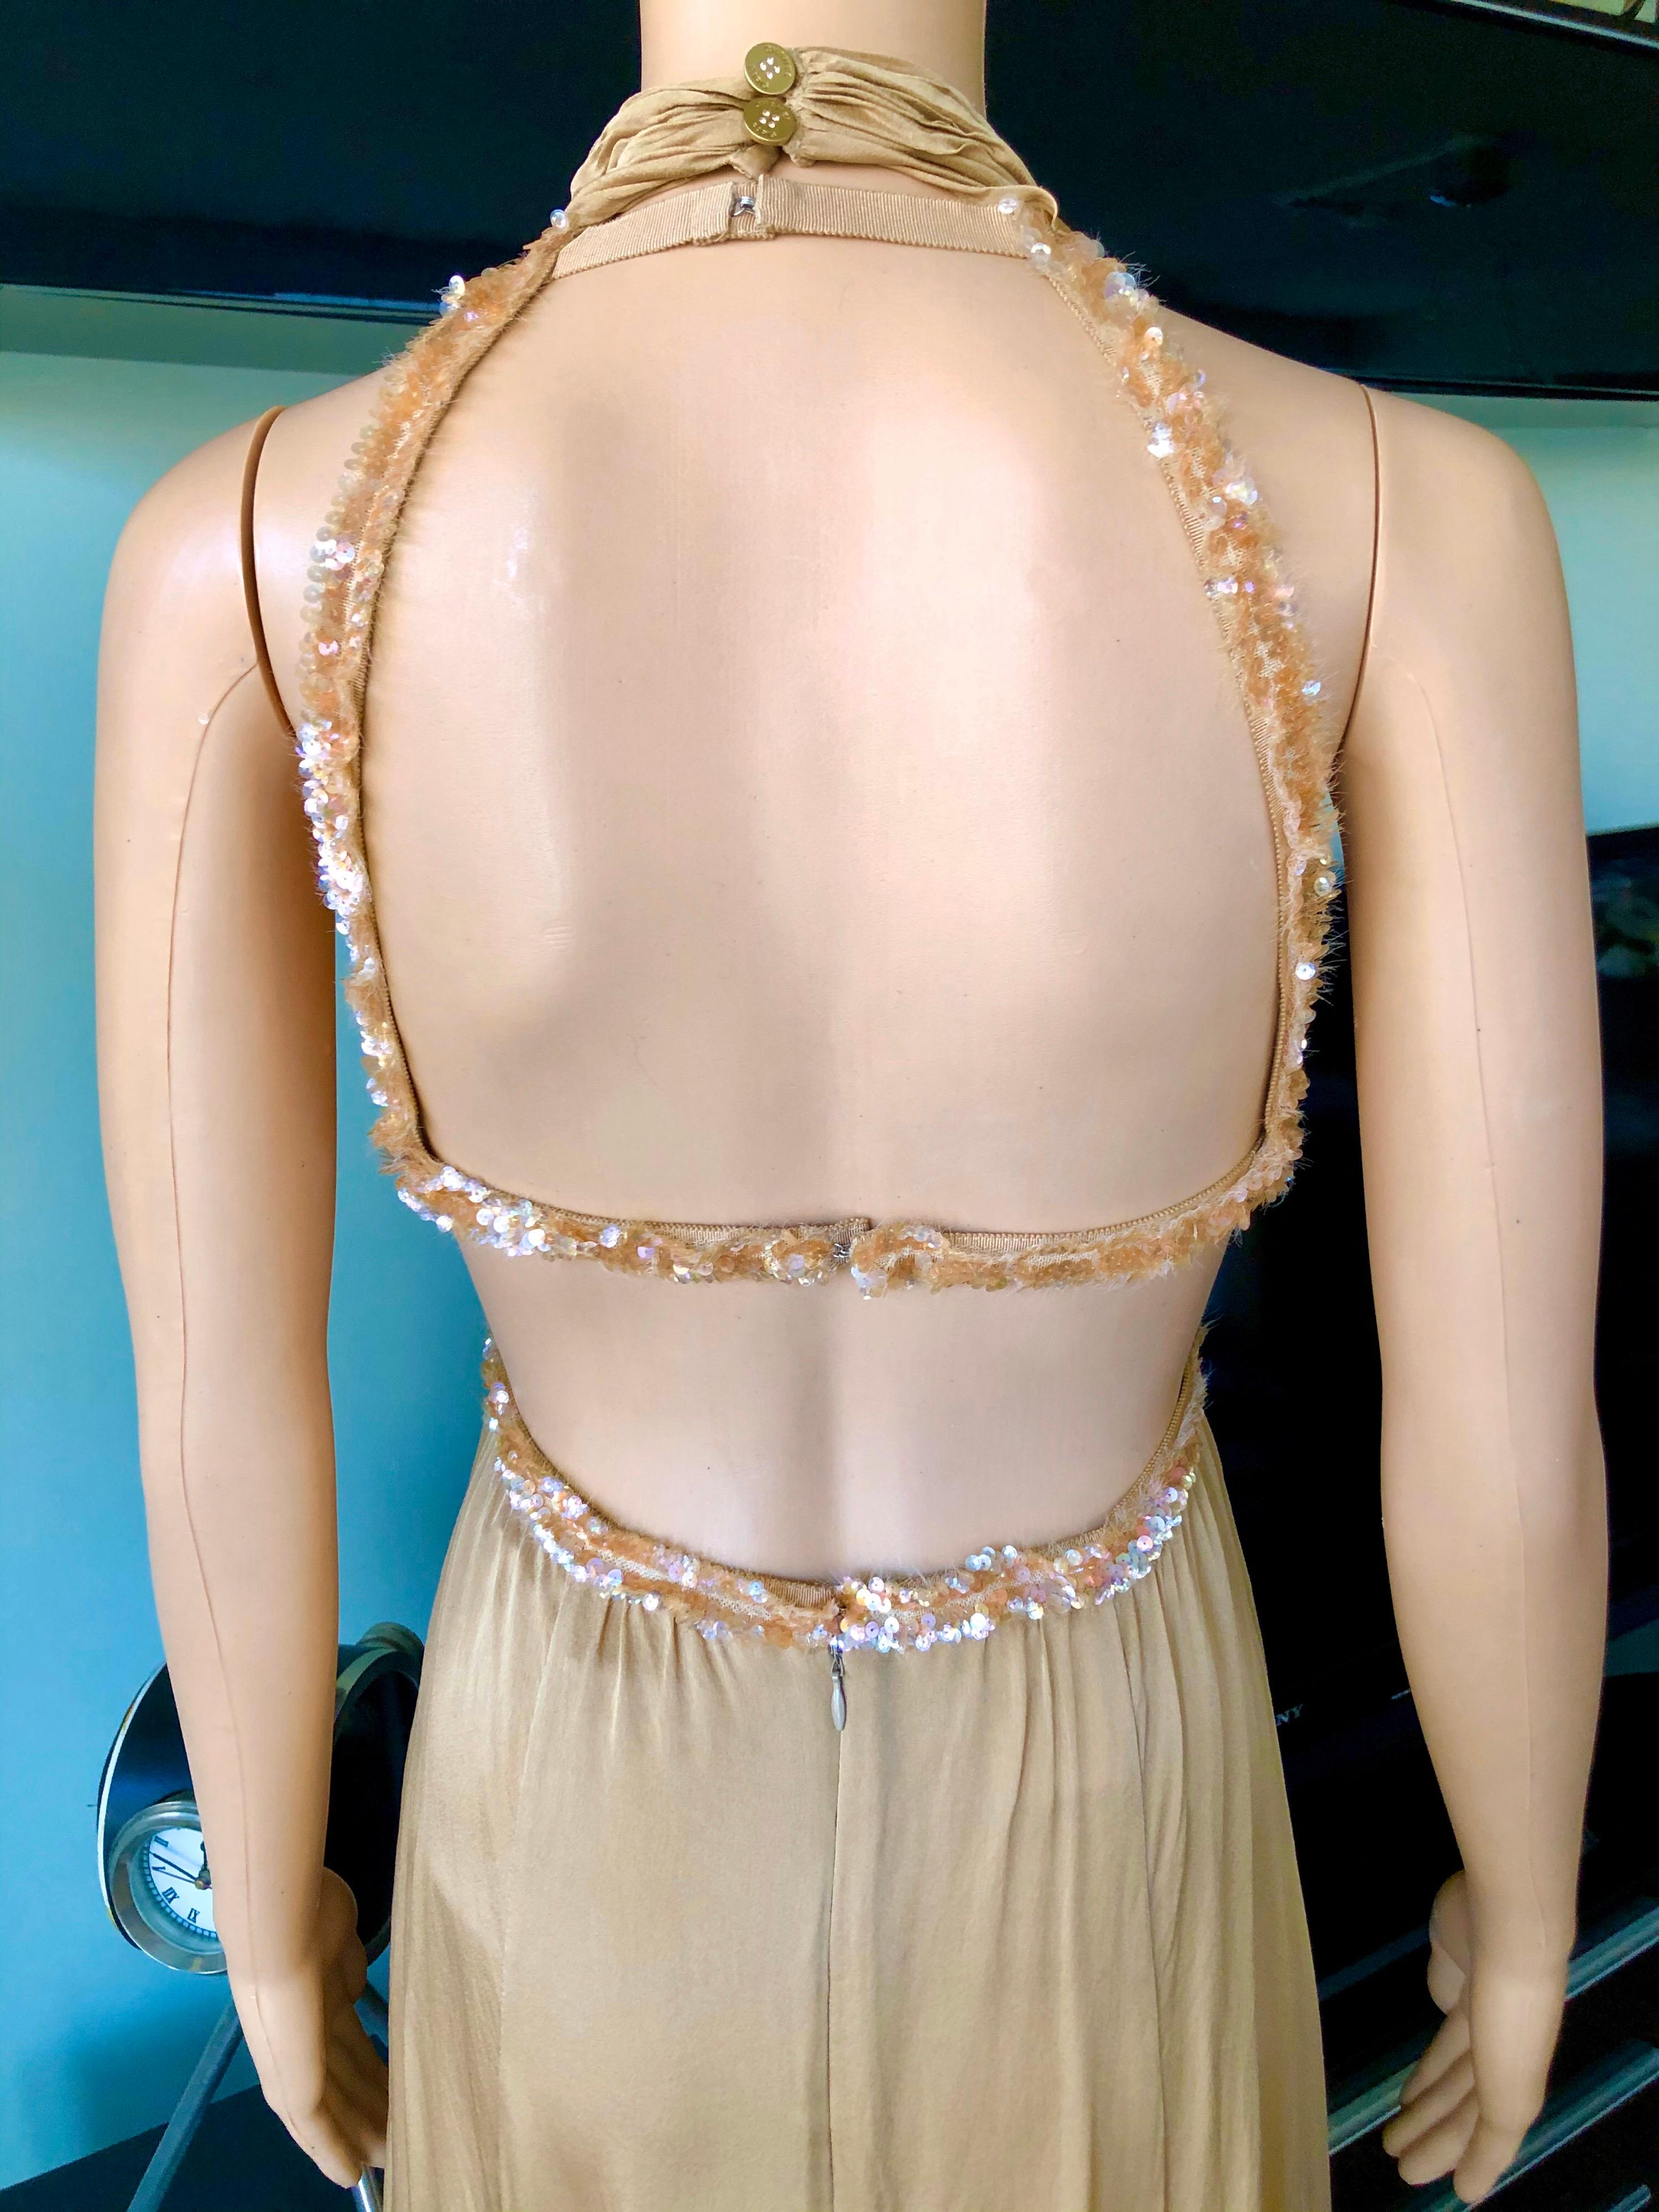 Women's or Men's Chanel S/S 2003 Embellished Cut-Out Plunging Open Back Evening Dress Gown For Sale